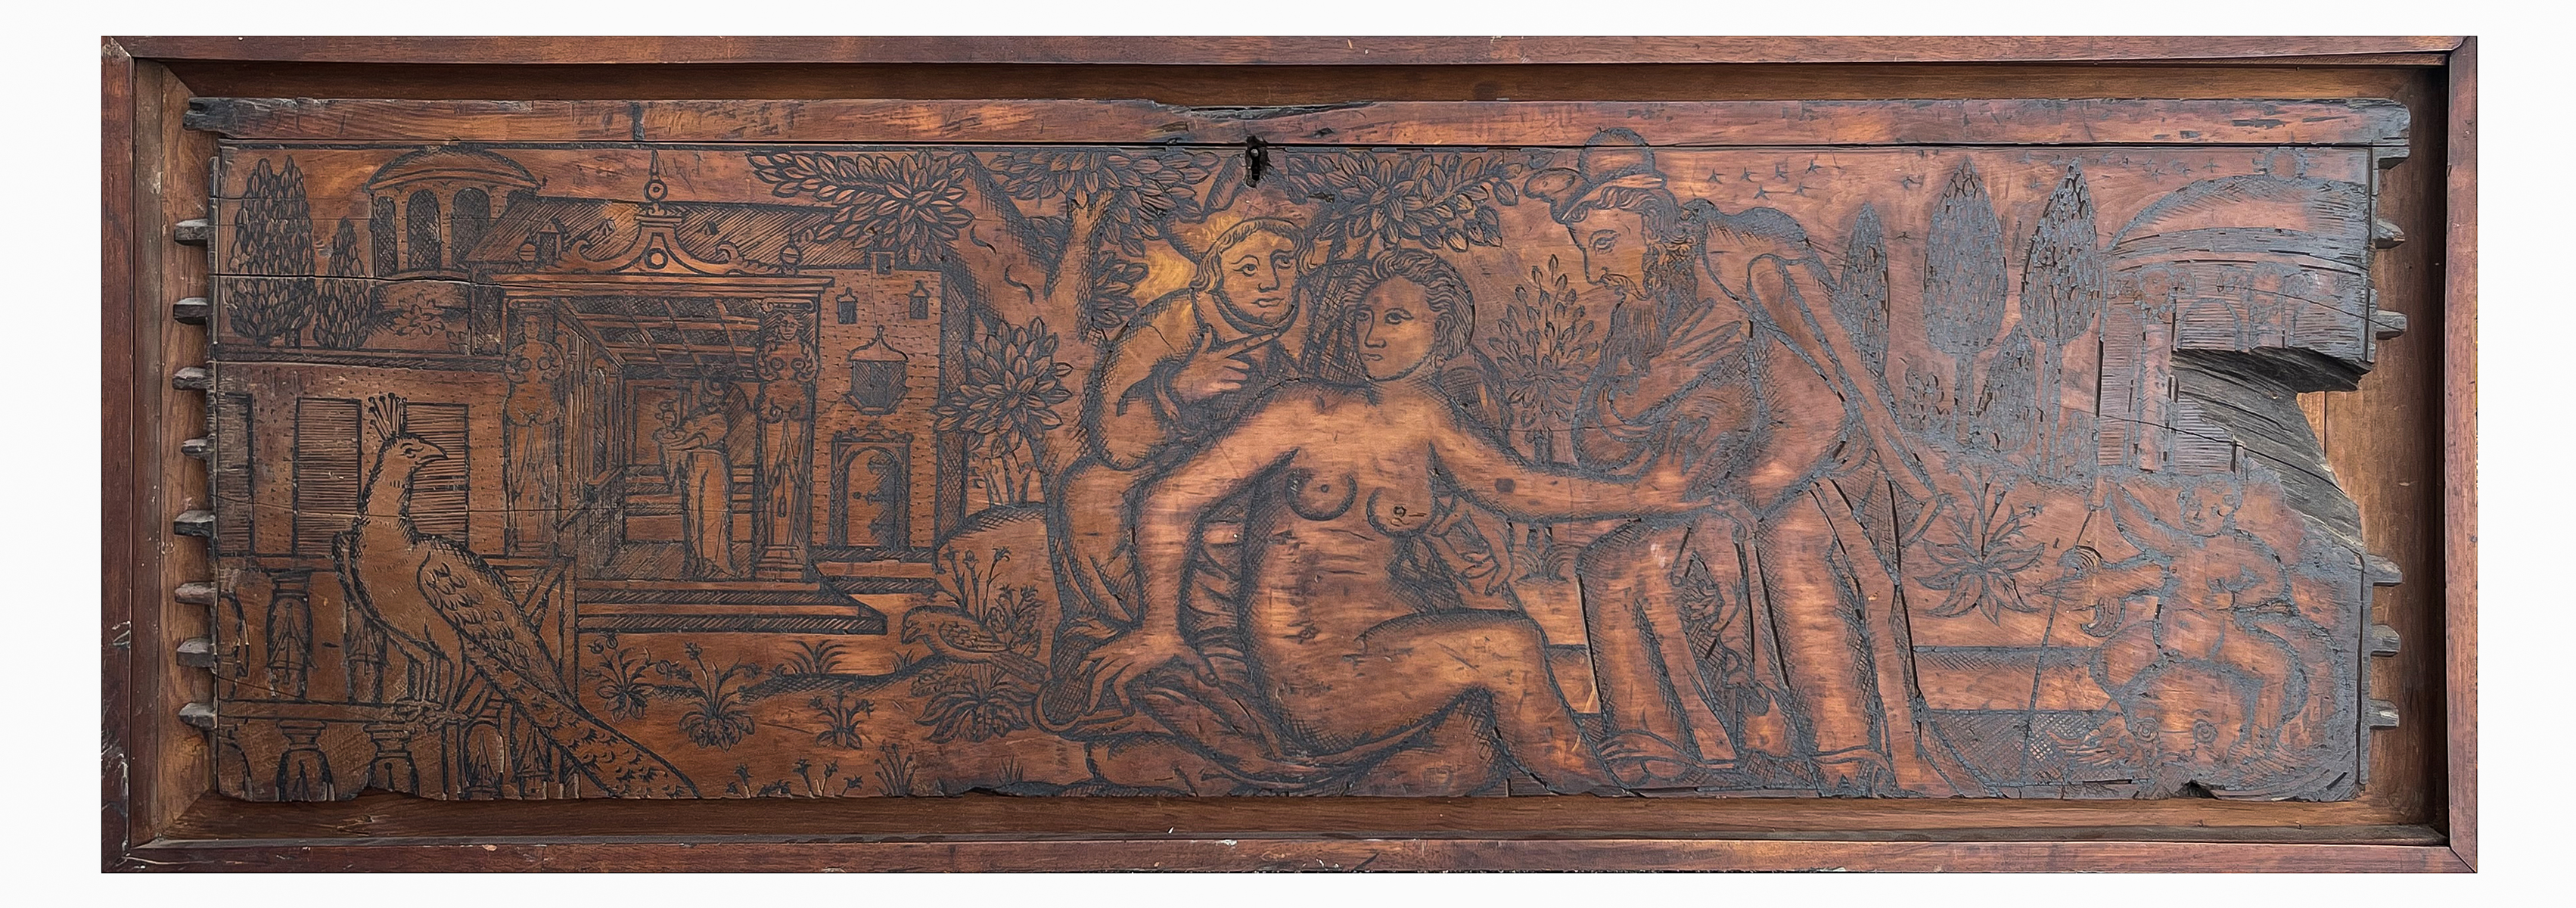 RELIEF CARVED WOOD PANEL FROM CASONNE 276128